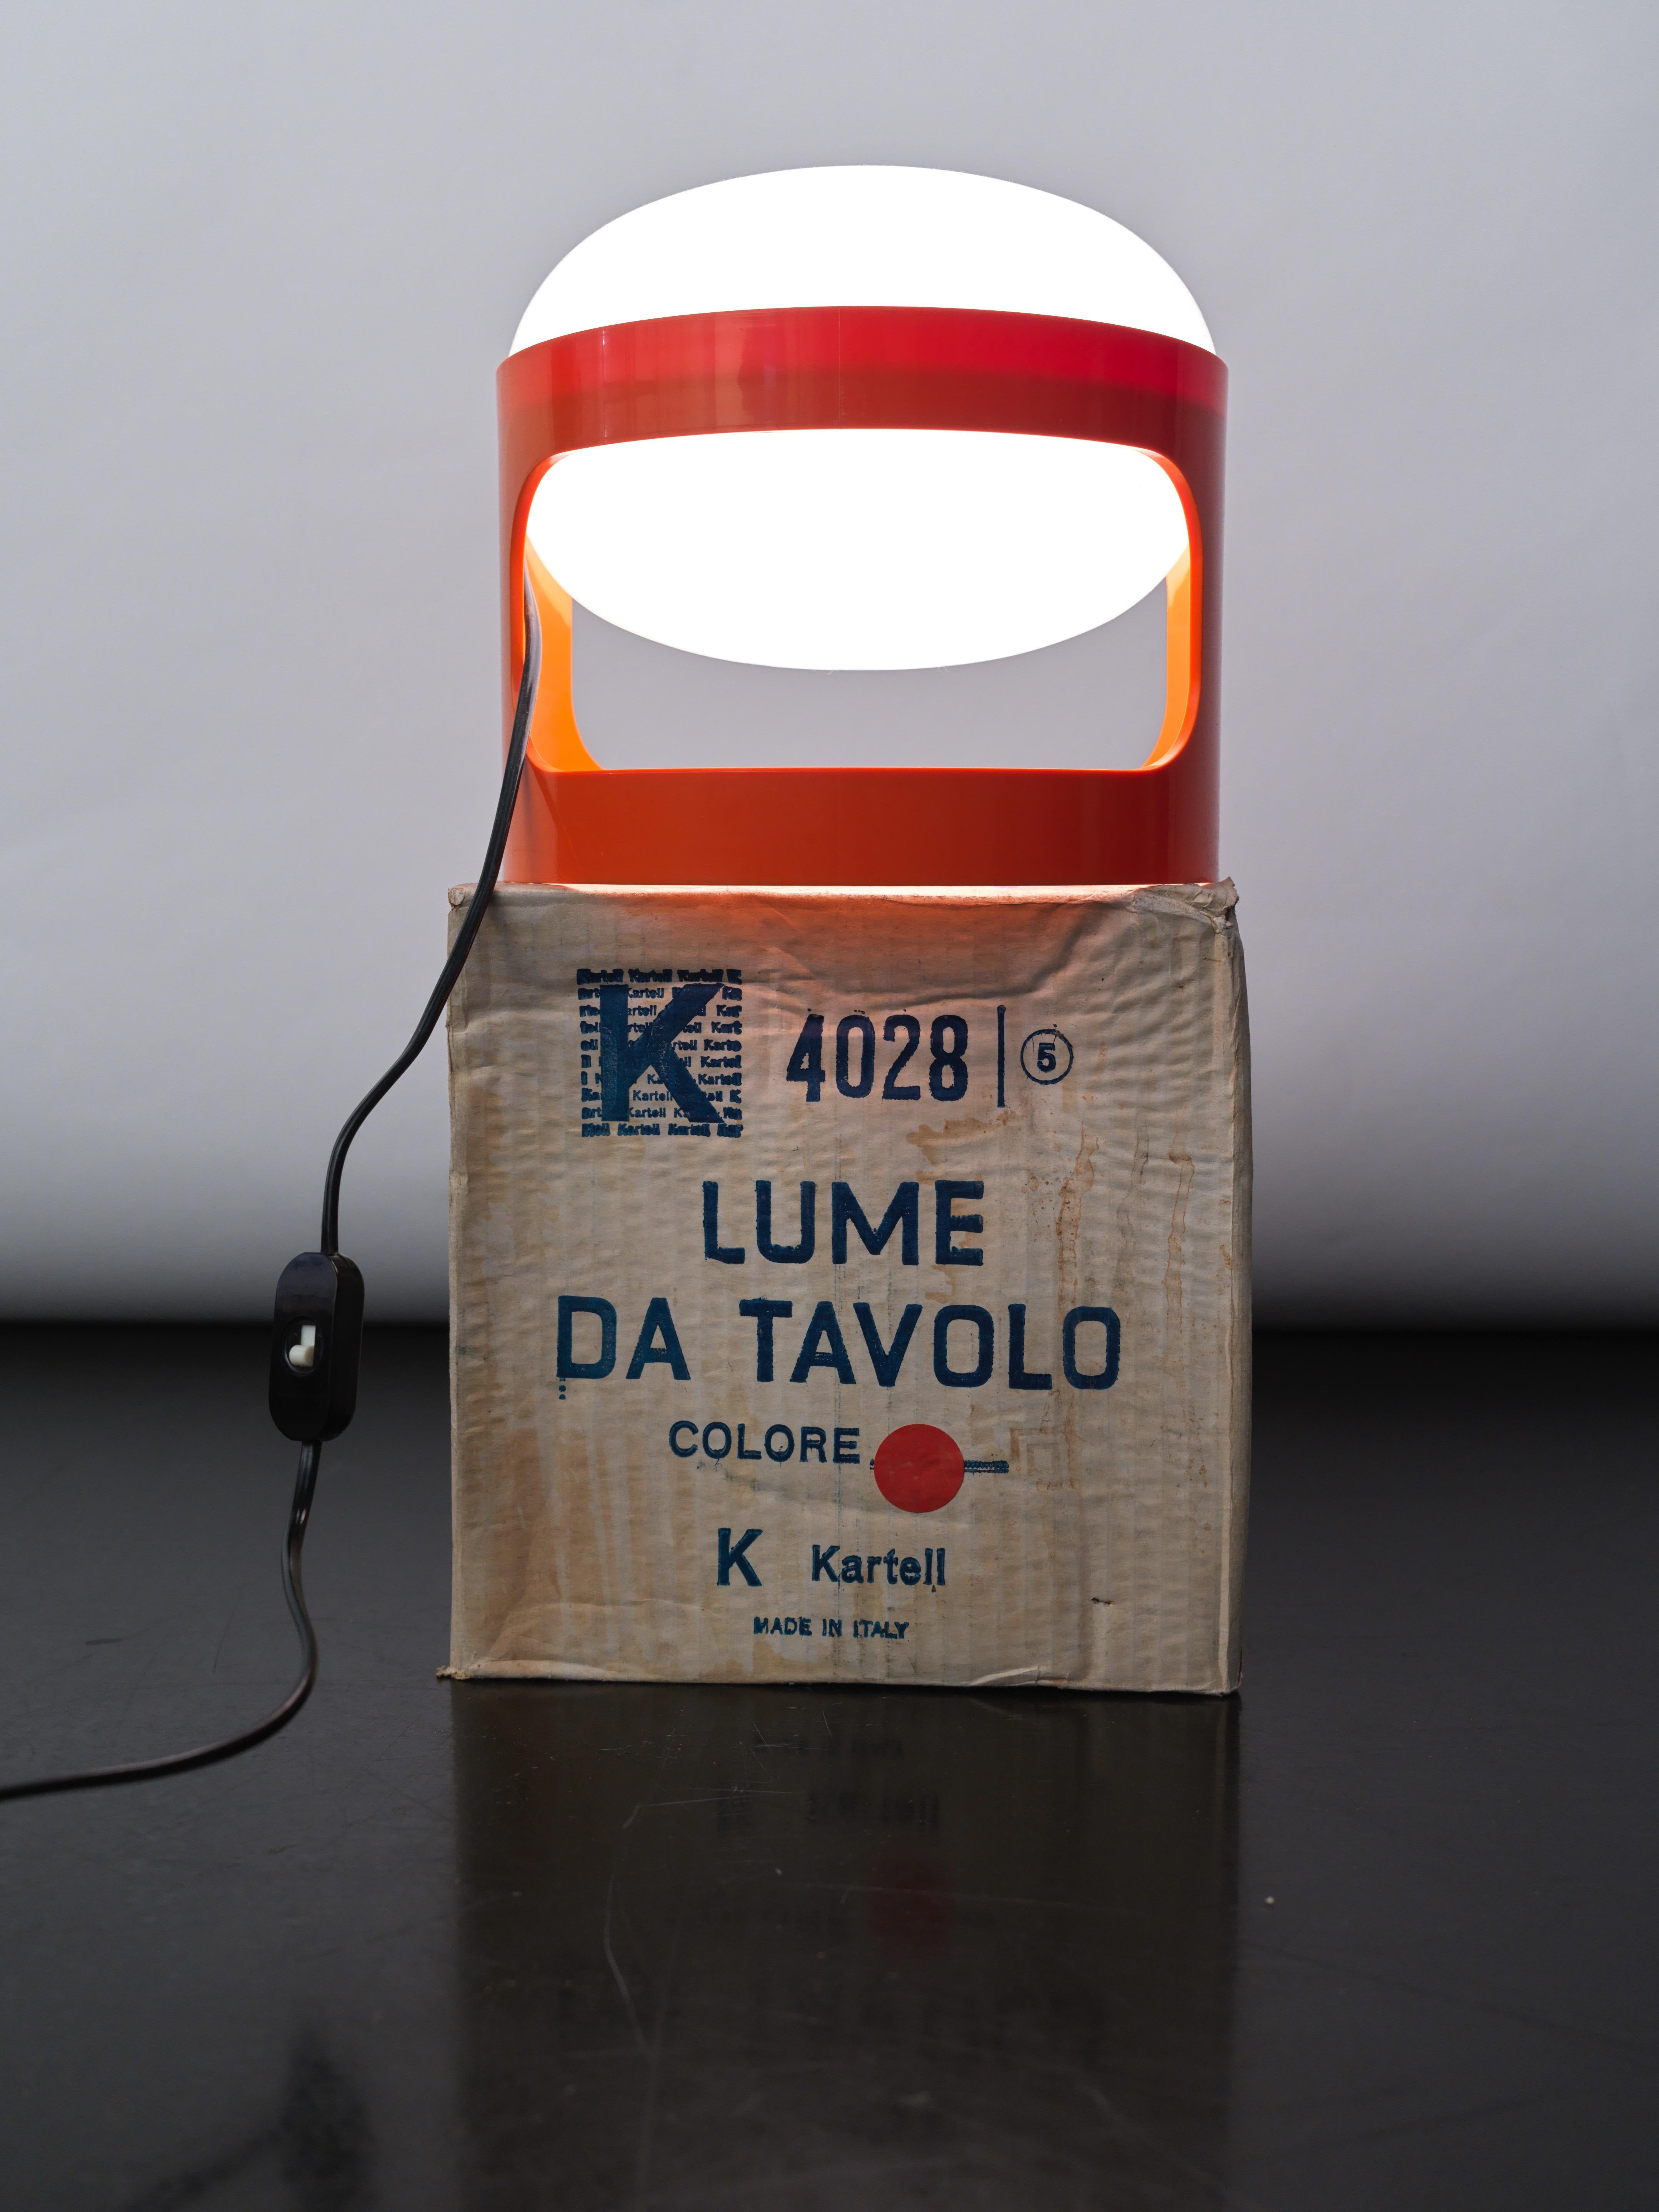 Joe Colombo KD28 table lamp for Kartell, early edition 1967.
The table lamp KD 28 is designed by Joe Colombo for Kartell in 1967. This light is stackable and sold as table or floor lamp. Made from 1967 until 1981. This is a rare, early version with